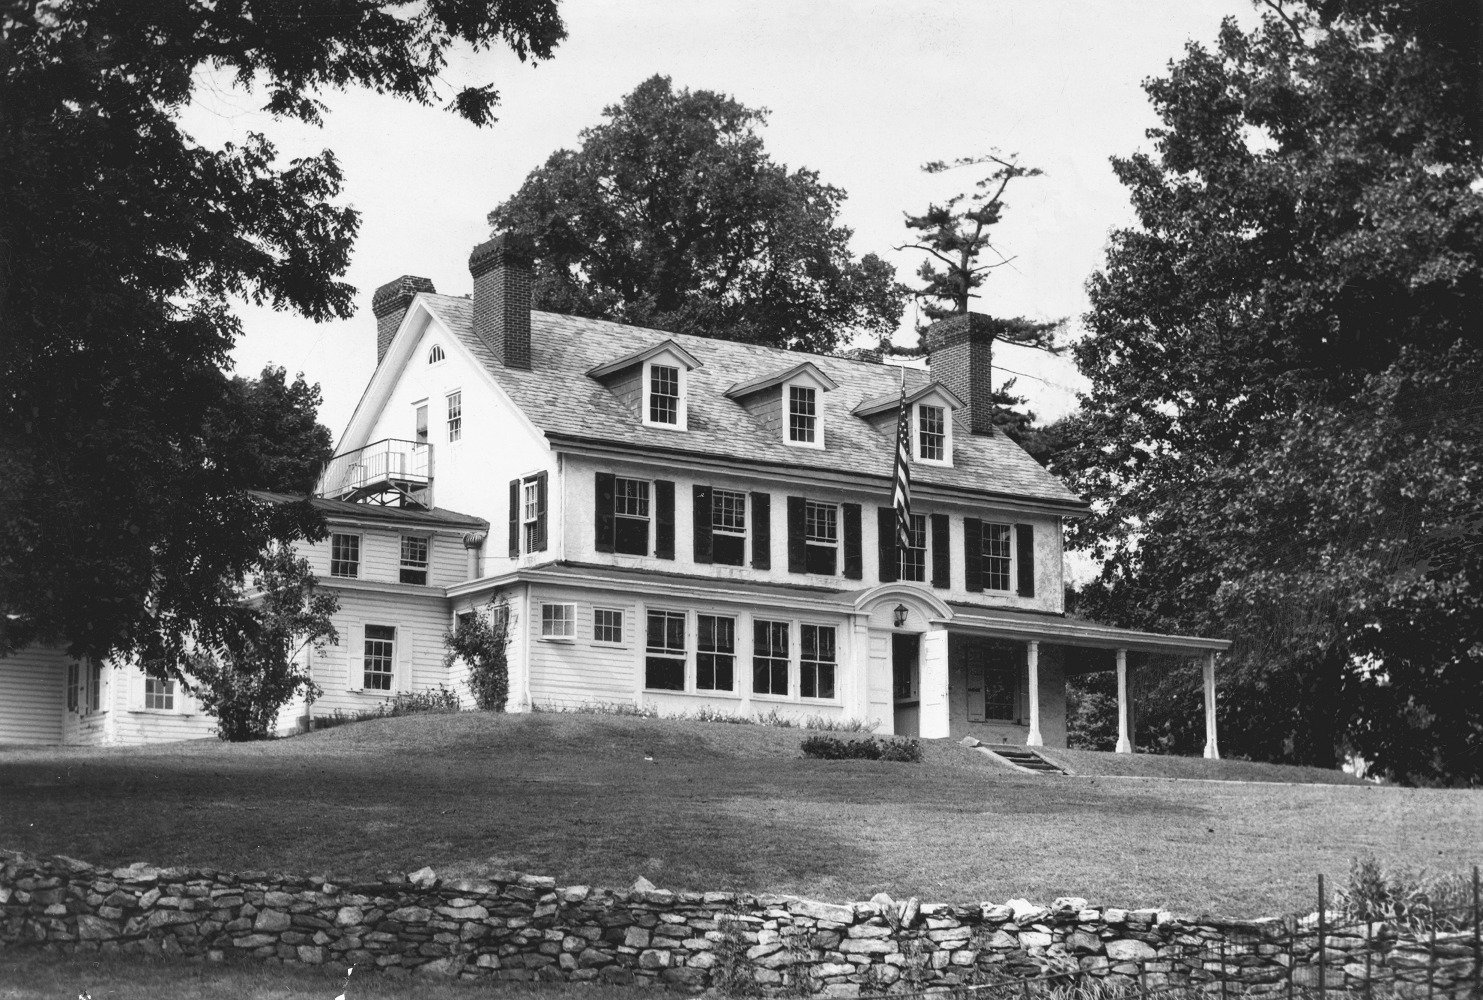 Hoodland after becoming Sellers Memorial Library